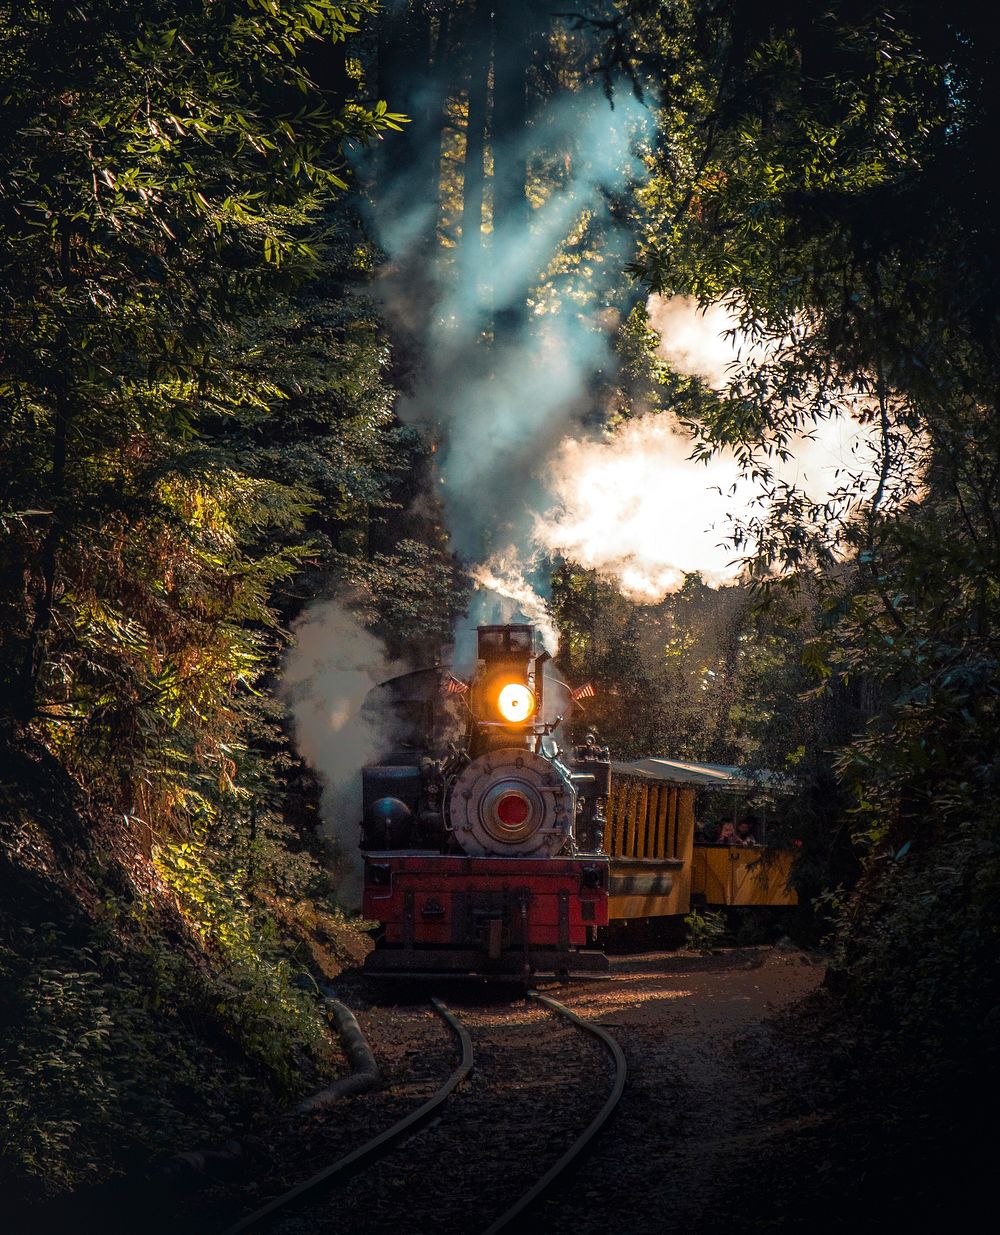 Train running in a forest of Felton ,United States